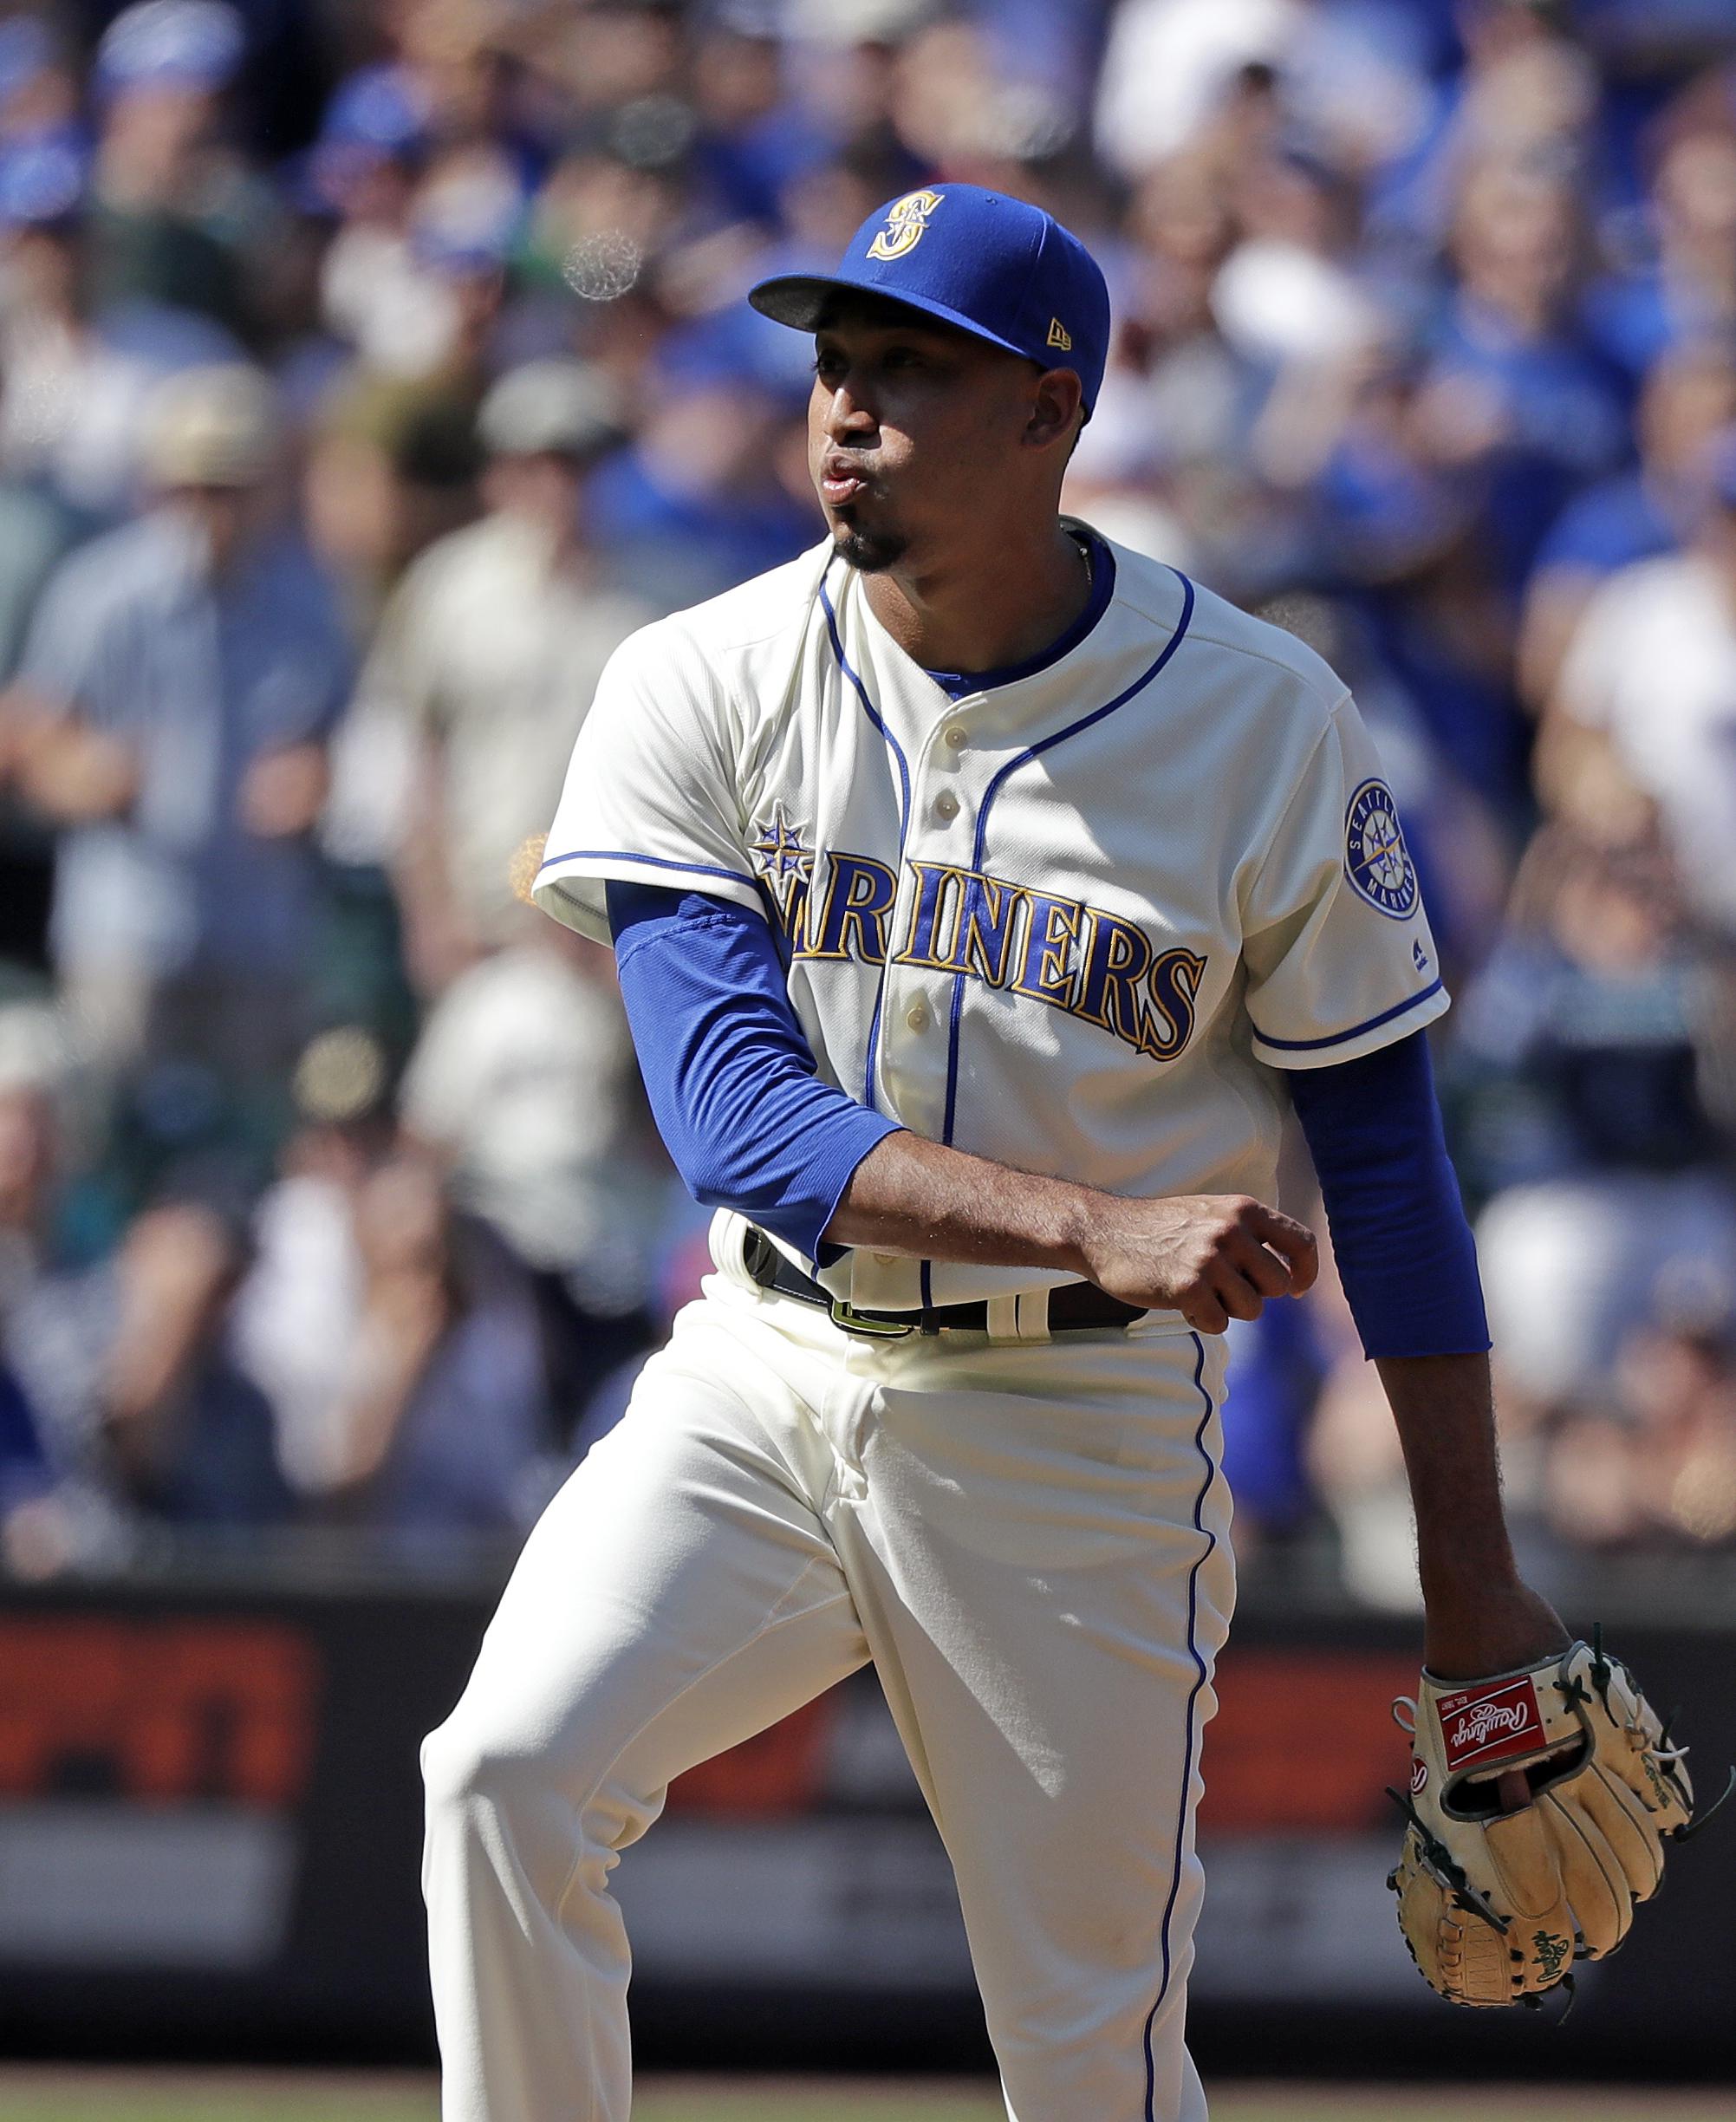 Mariners closer Edwin Diaz named American League Reliever of the Year